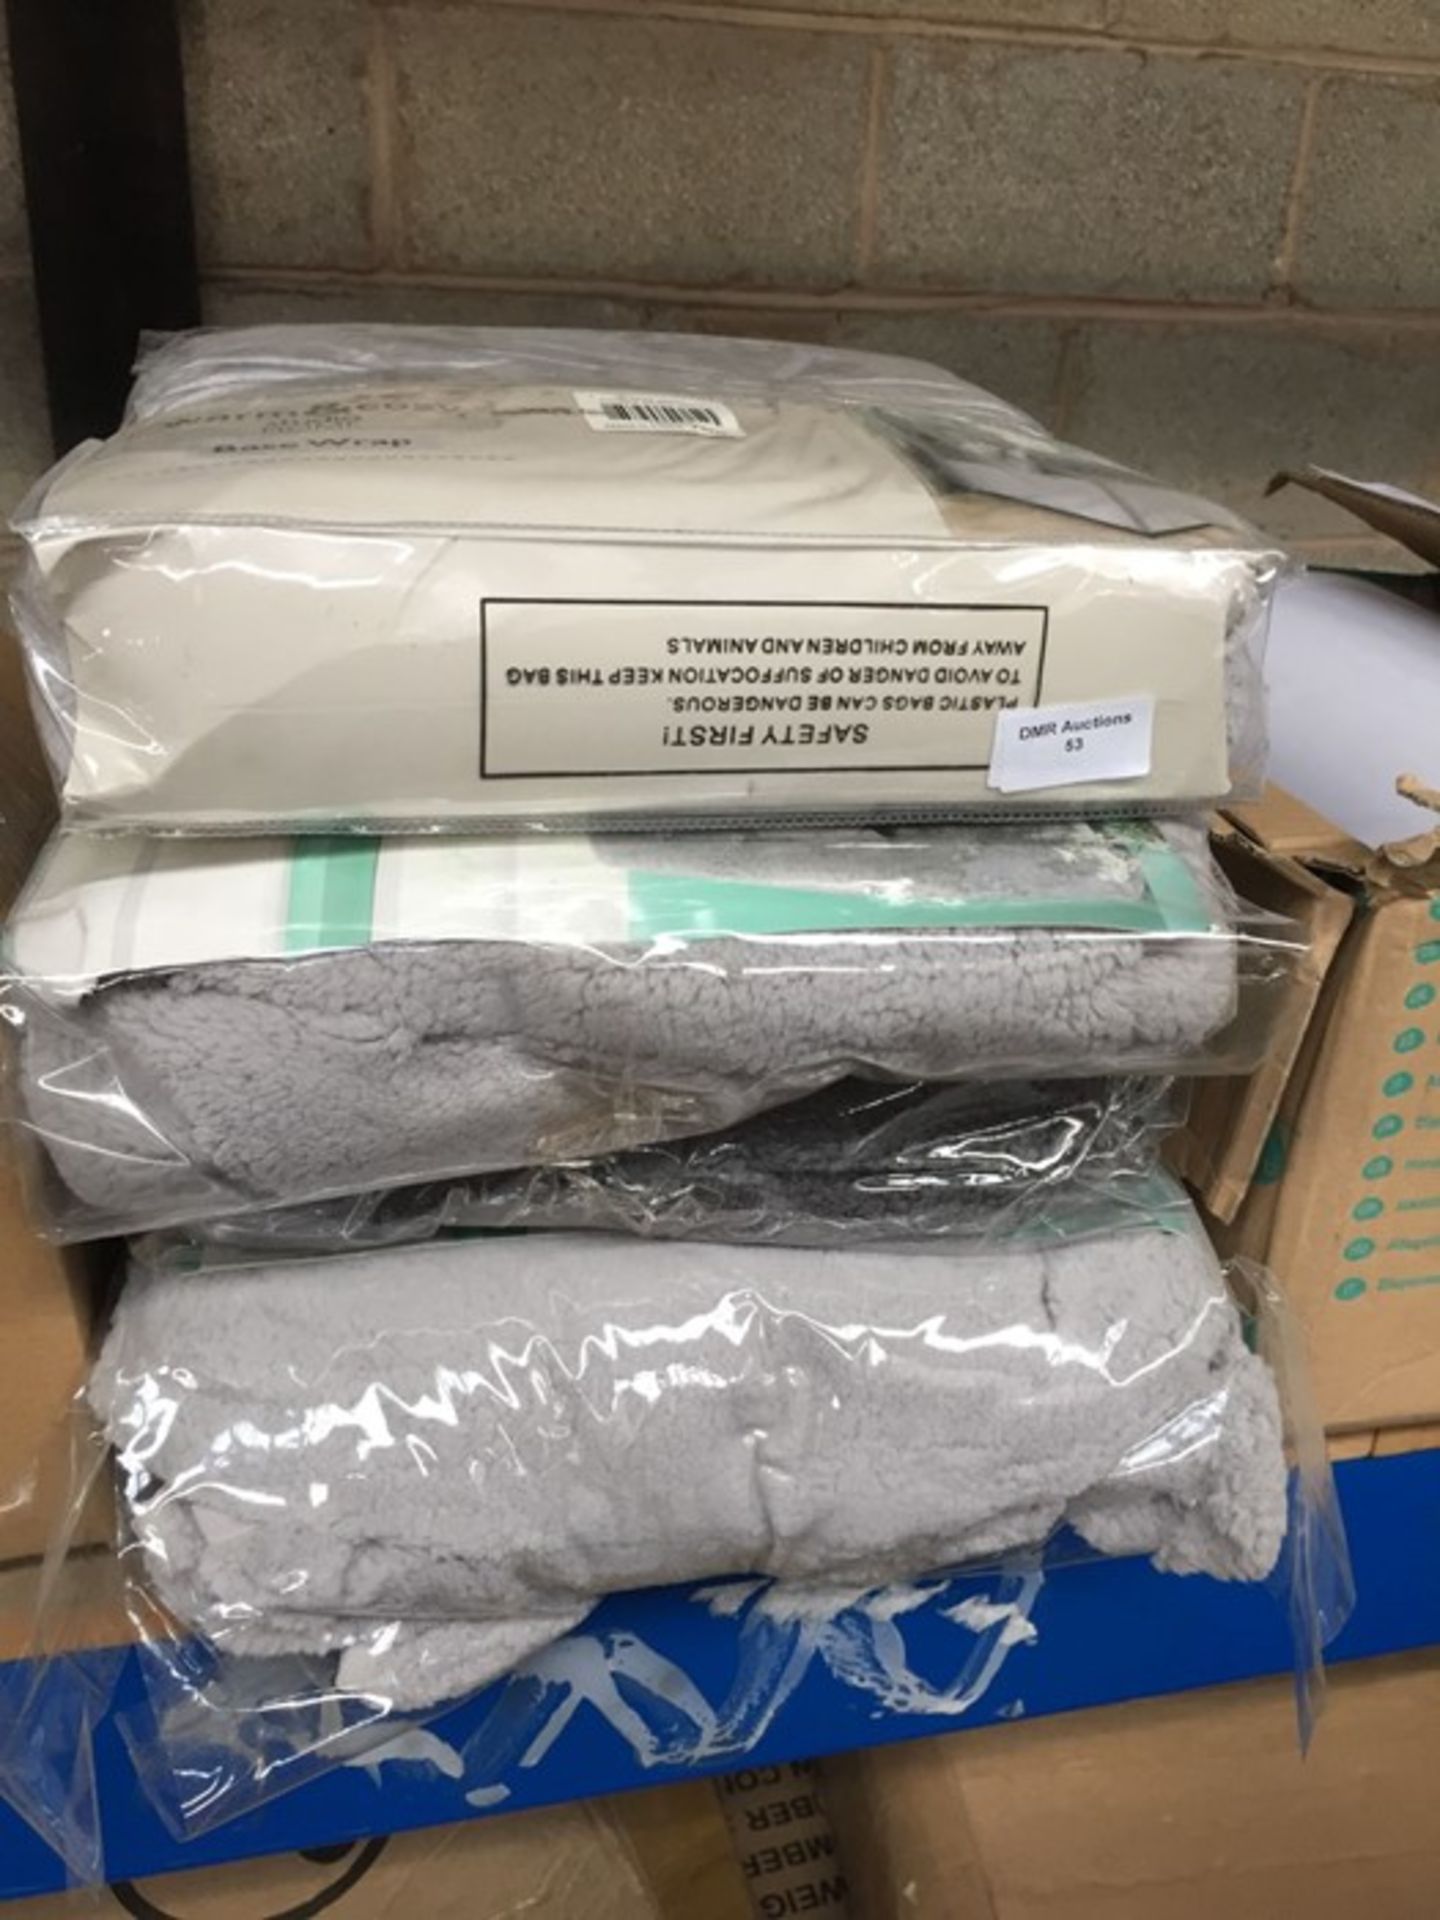 1 LOT TO CONTAIN 4 X DOUBLE SILVER BED BASE WRAPS IN GREY - SEALED AND BAGGED - Image 2 of 2